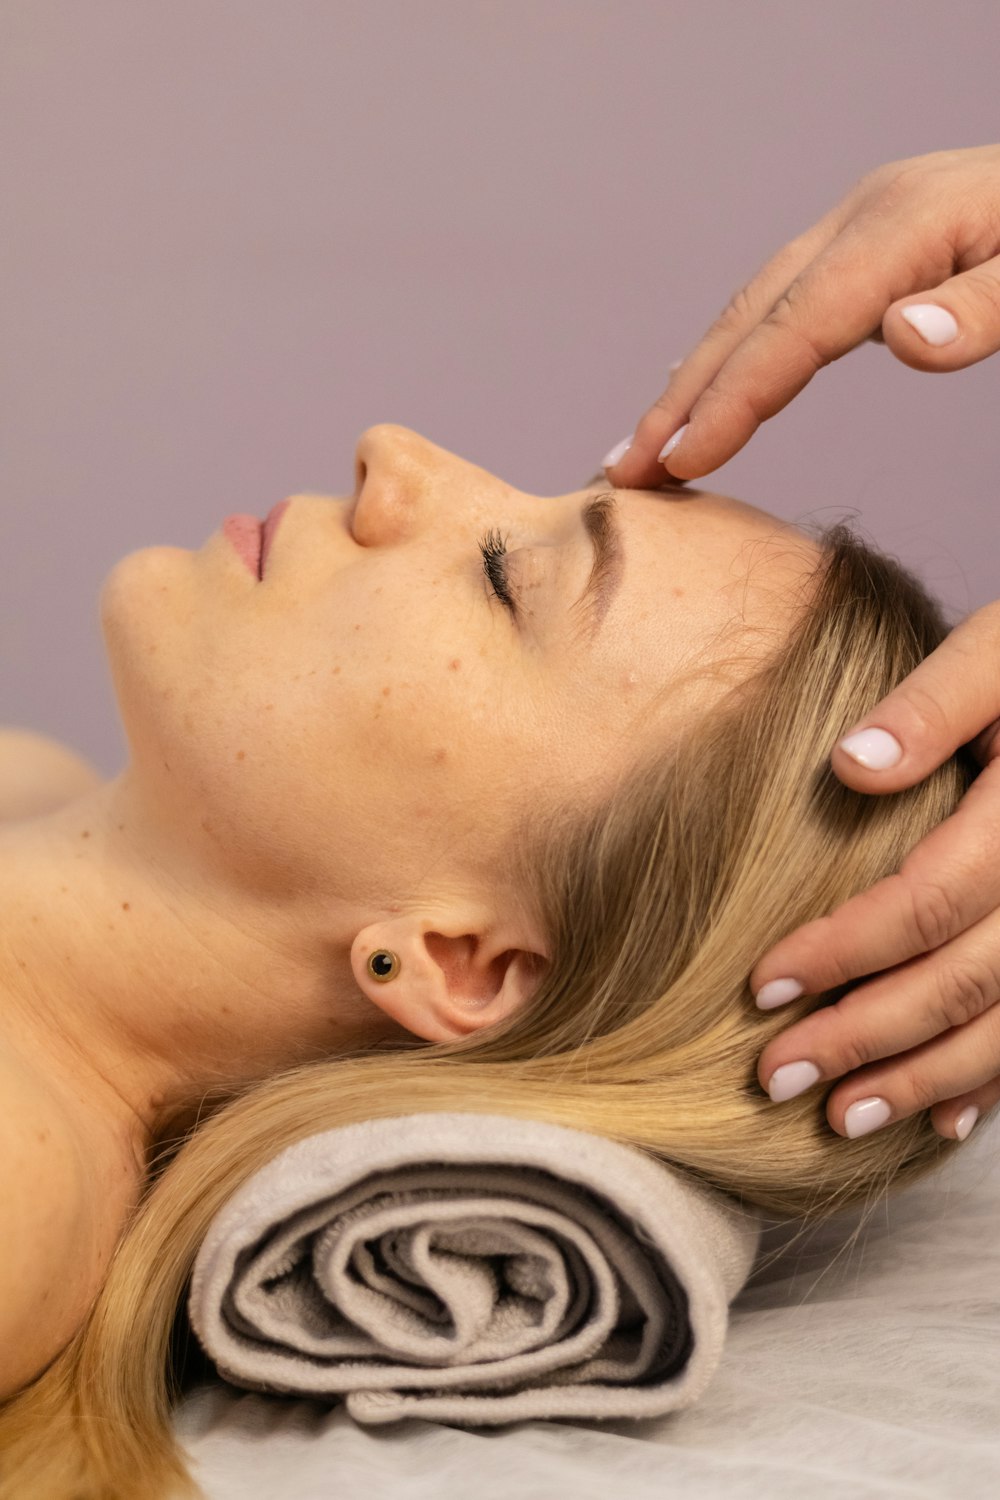 a woman getting a facial massage at a spa